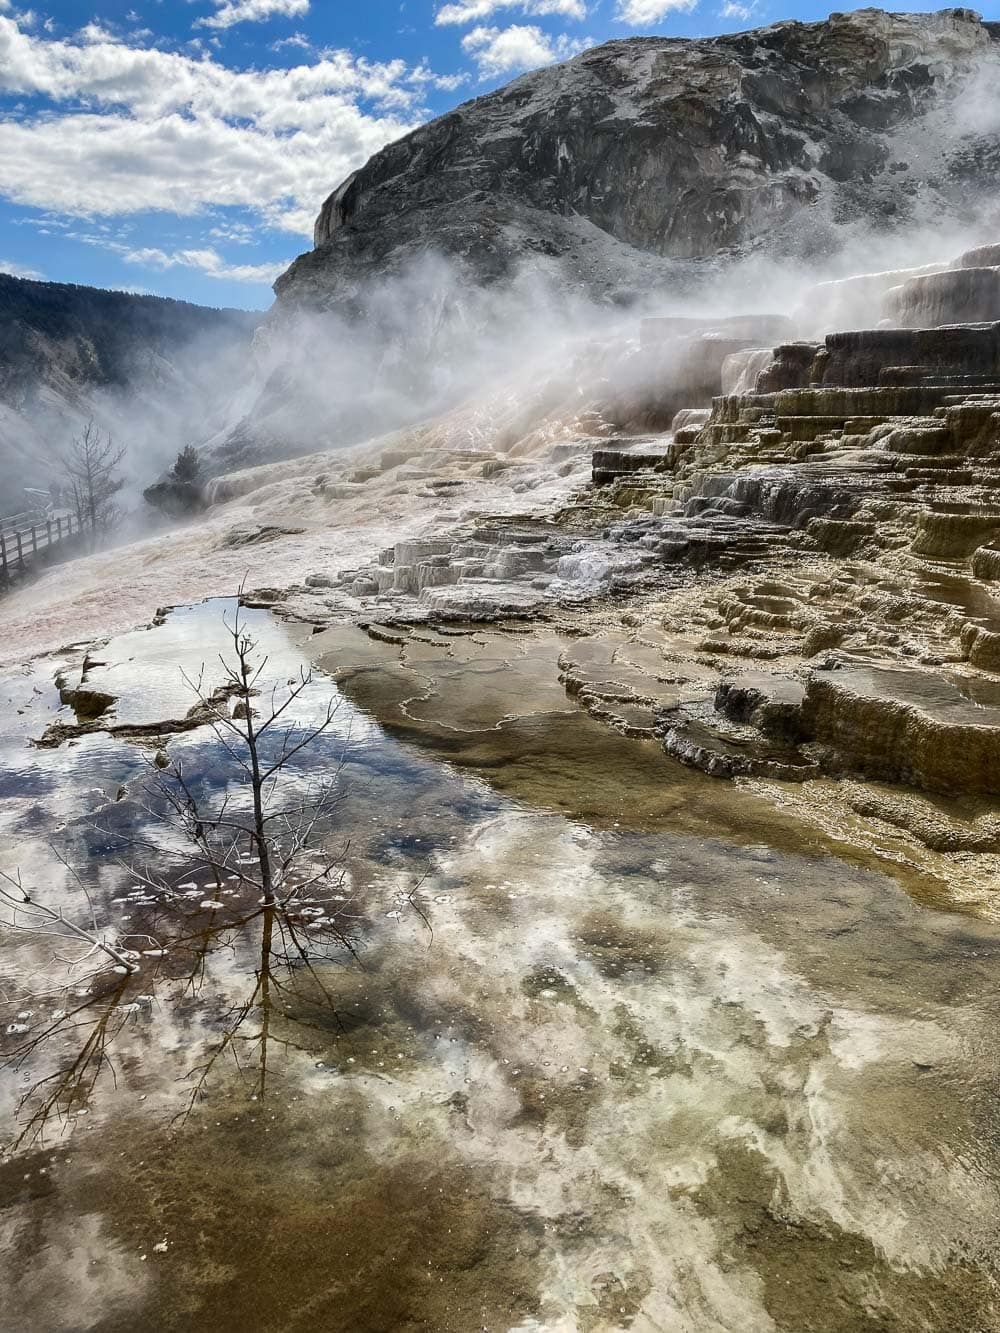 Lower Terraces boardwalk at Mammoth Hot Springs, Yellowstone National Park